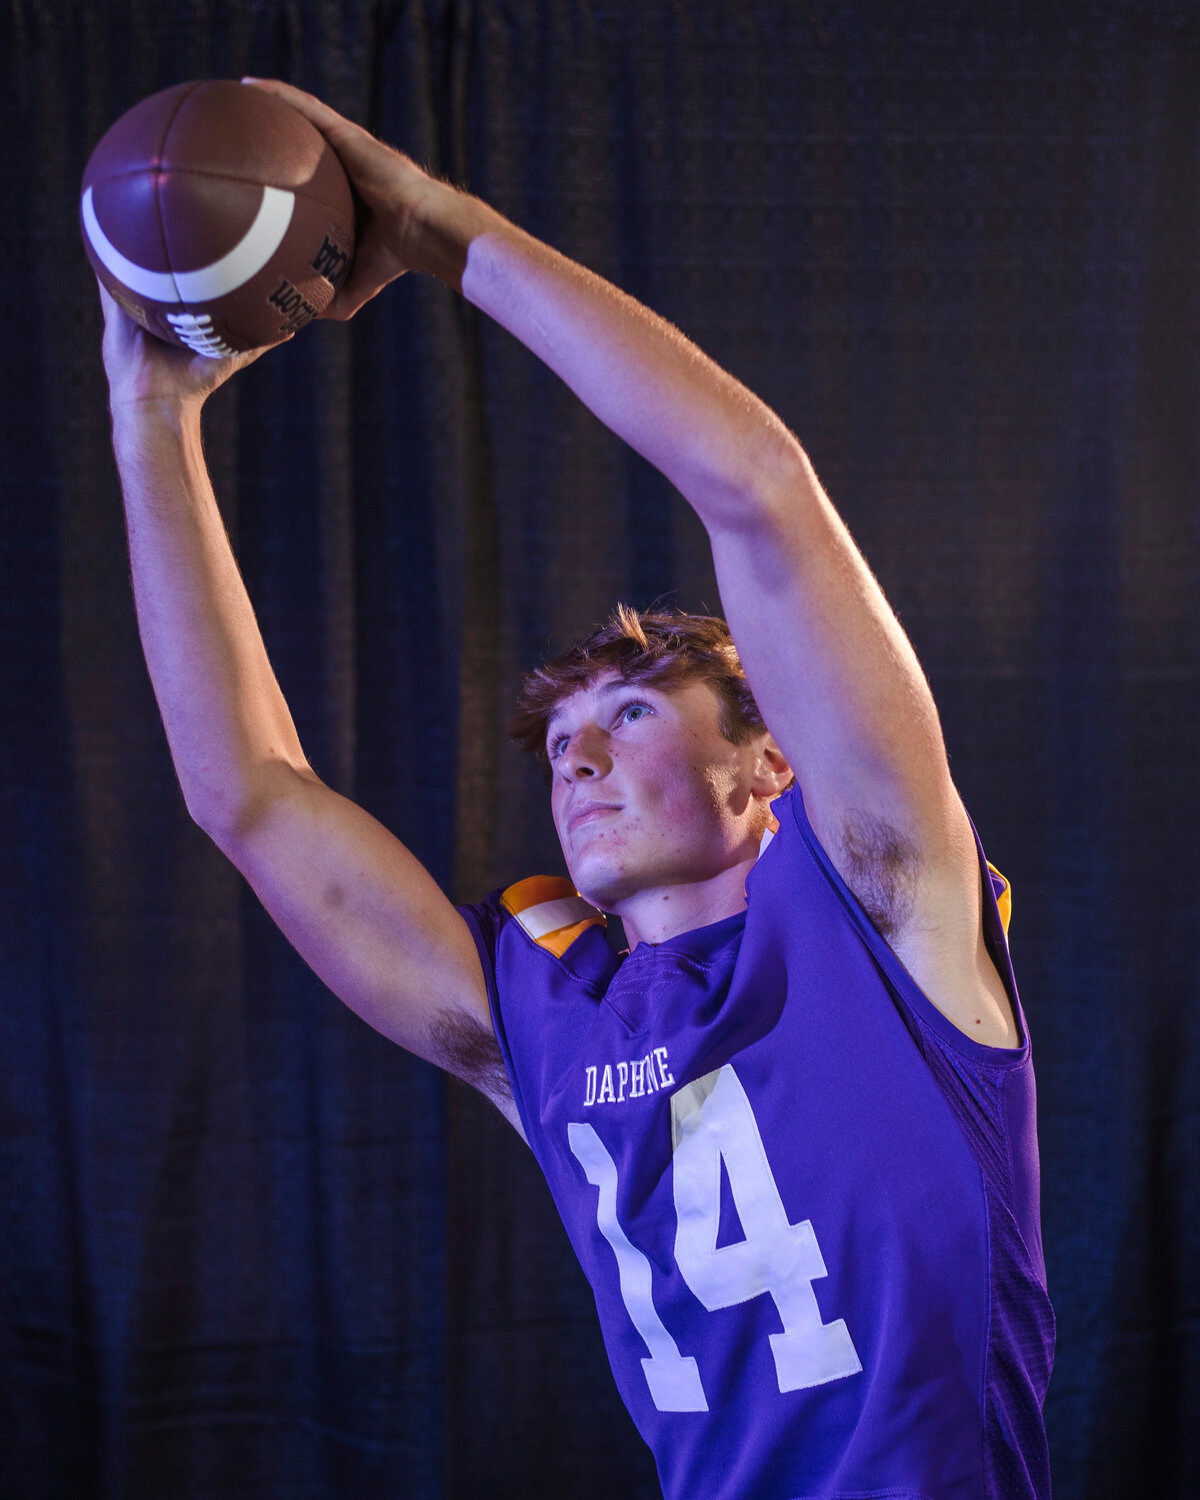 John Davis reaches for a catch during the portrait session following the Daphne Trojans’ interview as part of Gulf Coast Media Day in Orange Beach on July 27.